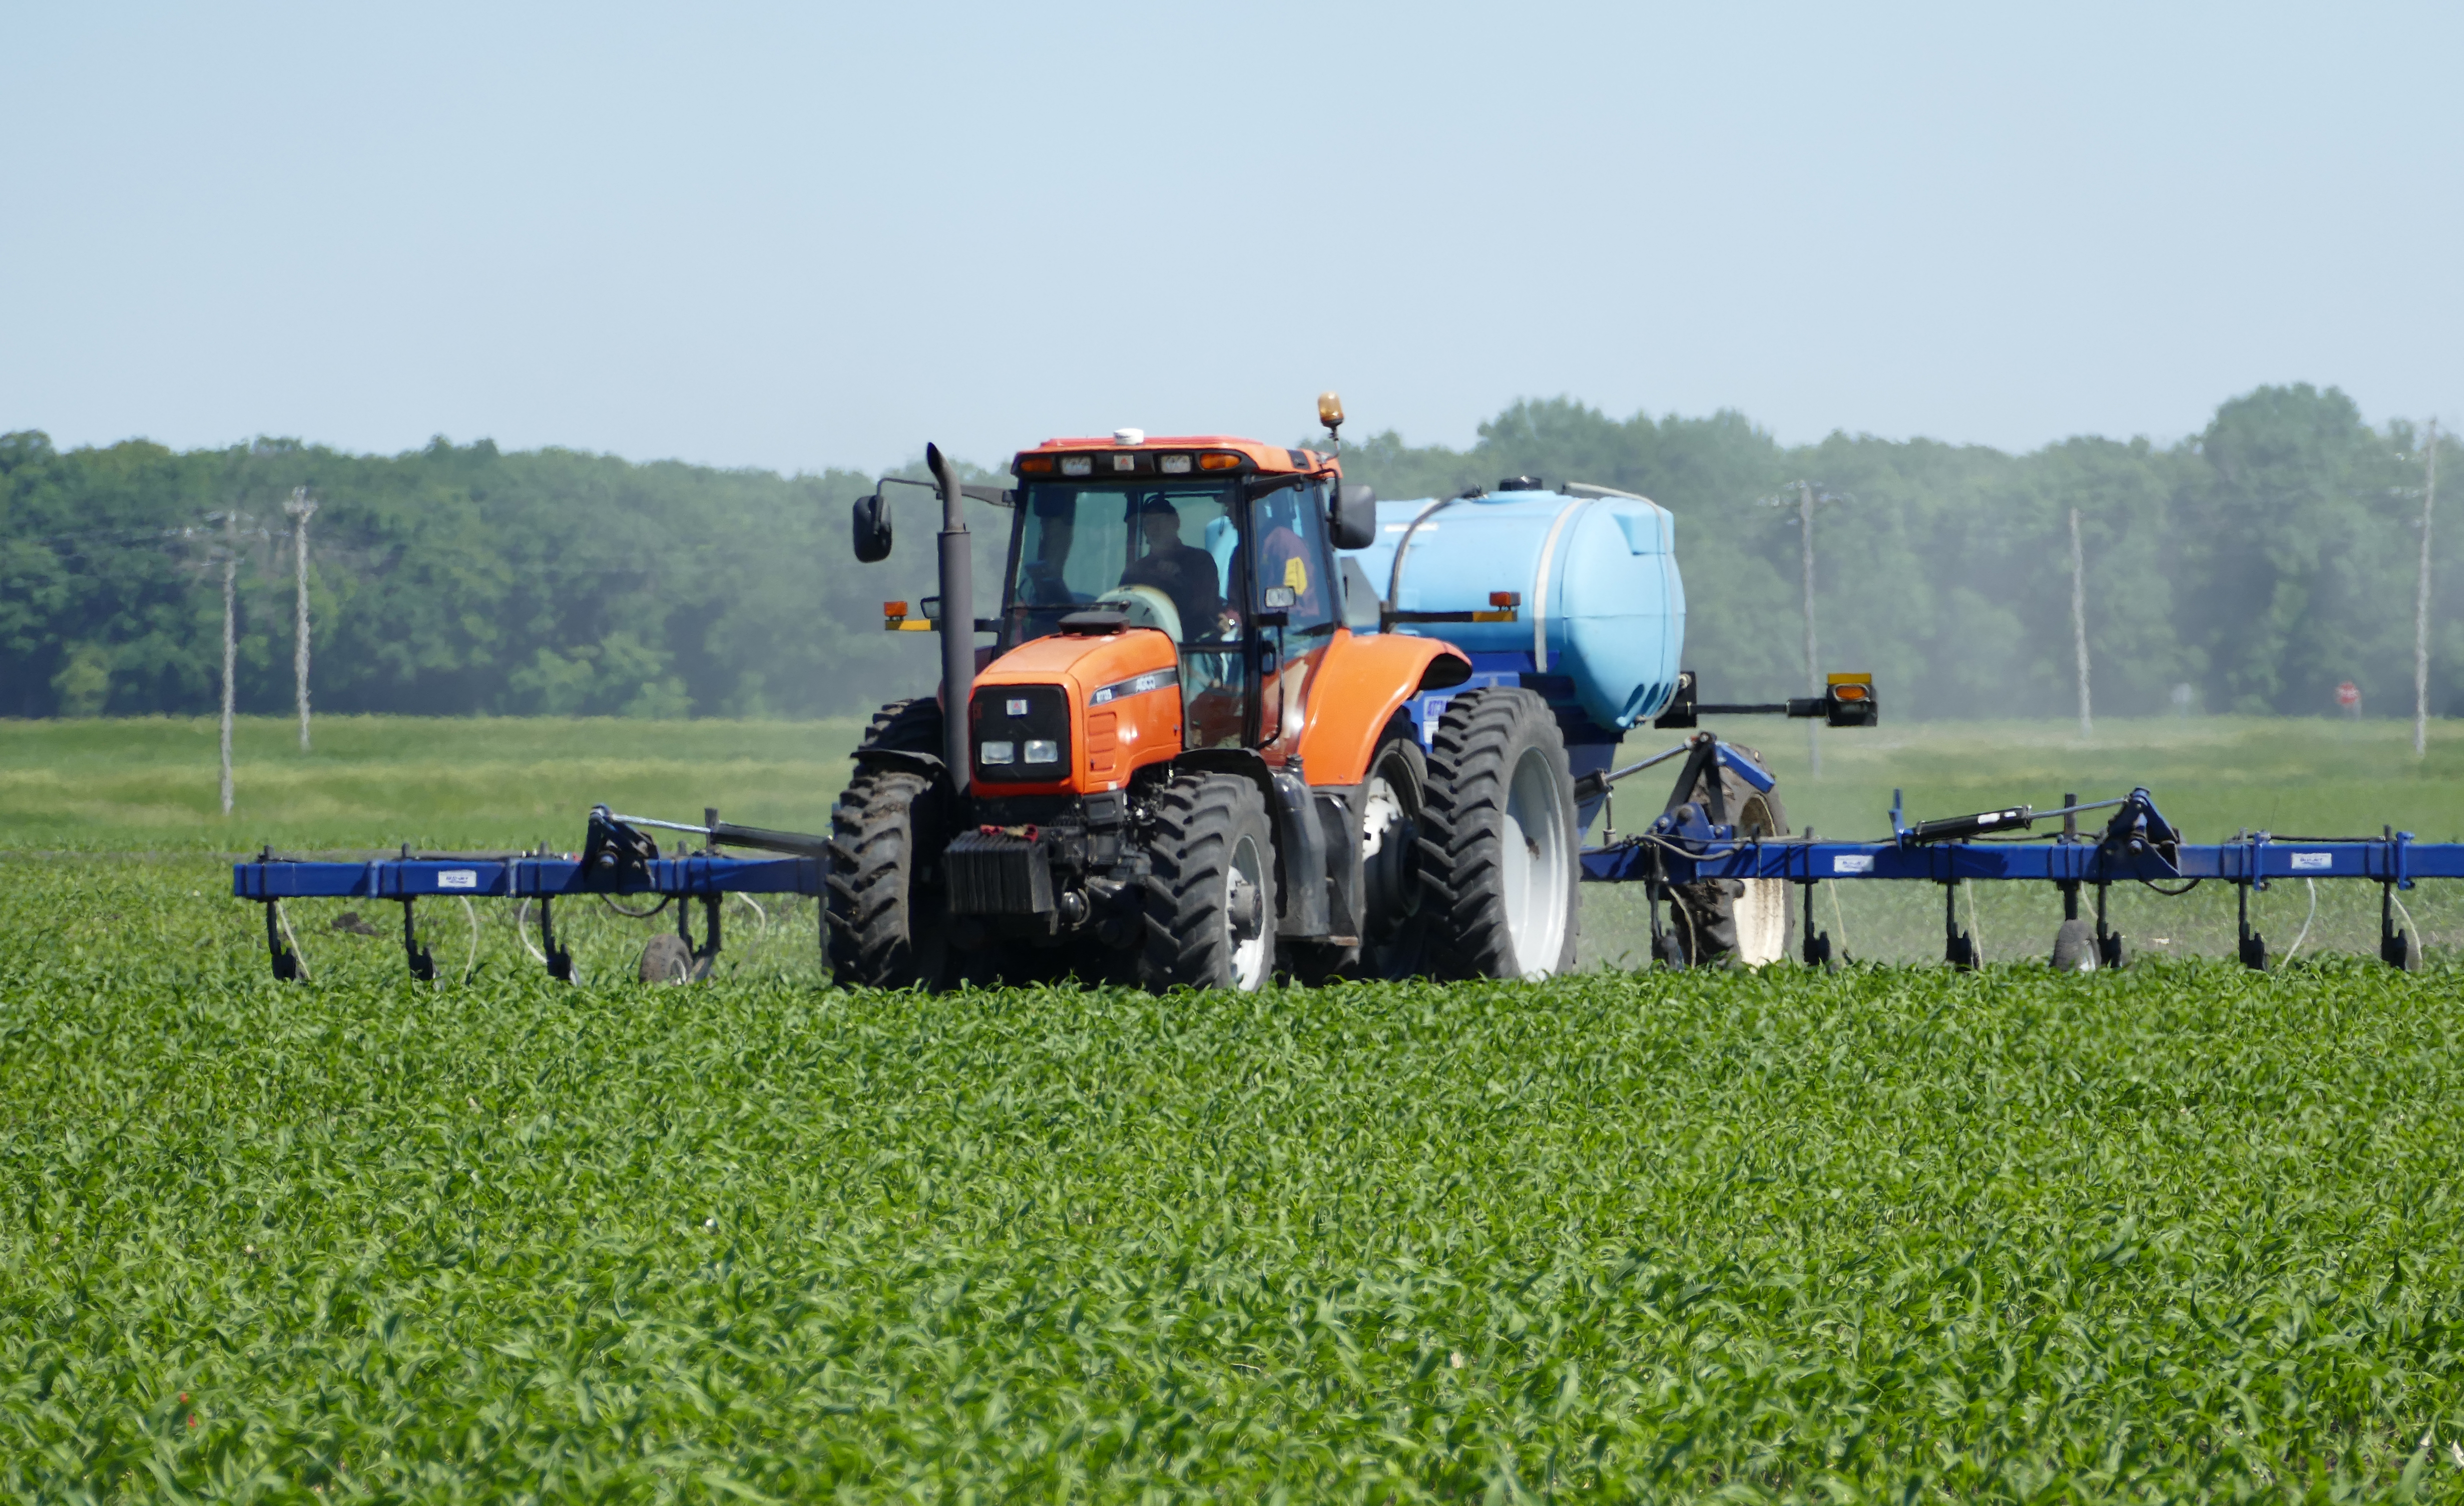 A tractor spraying manure